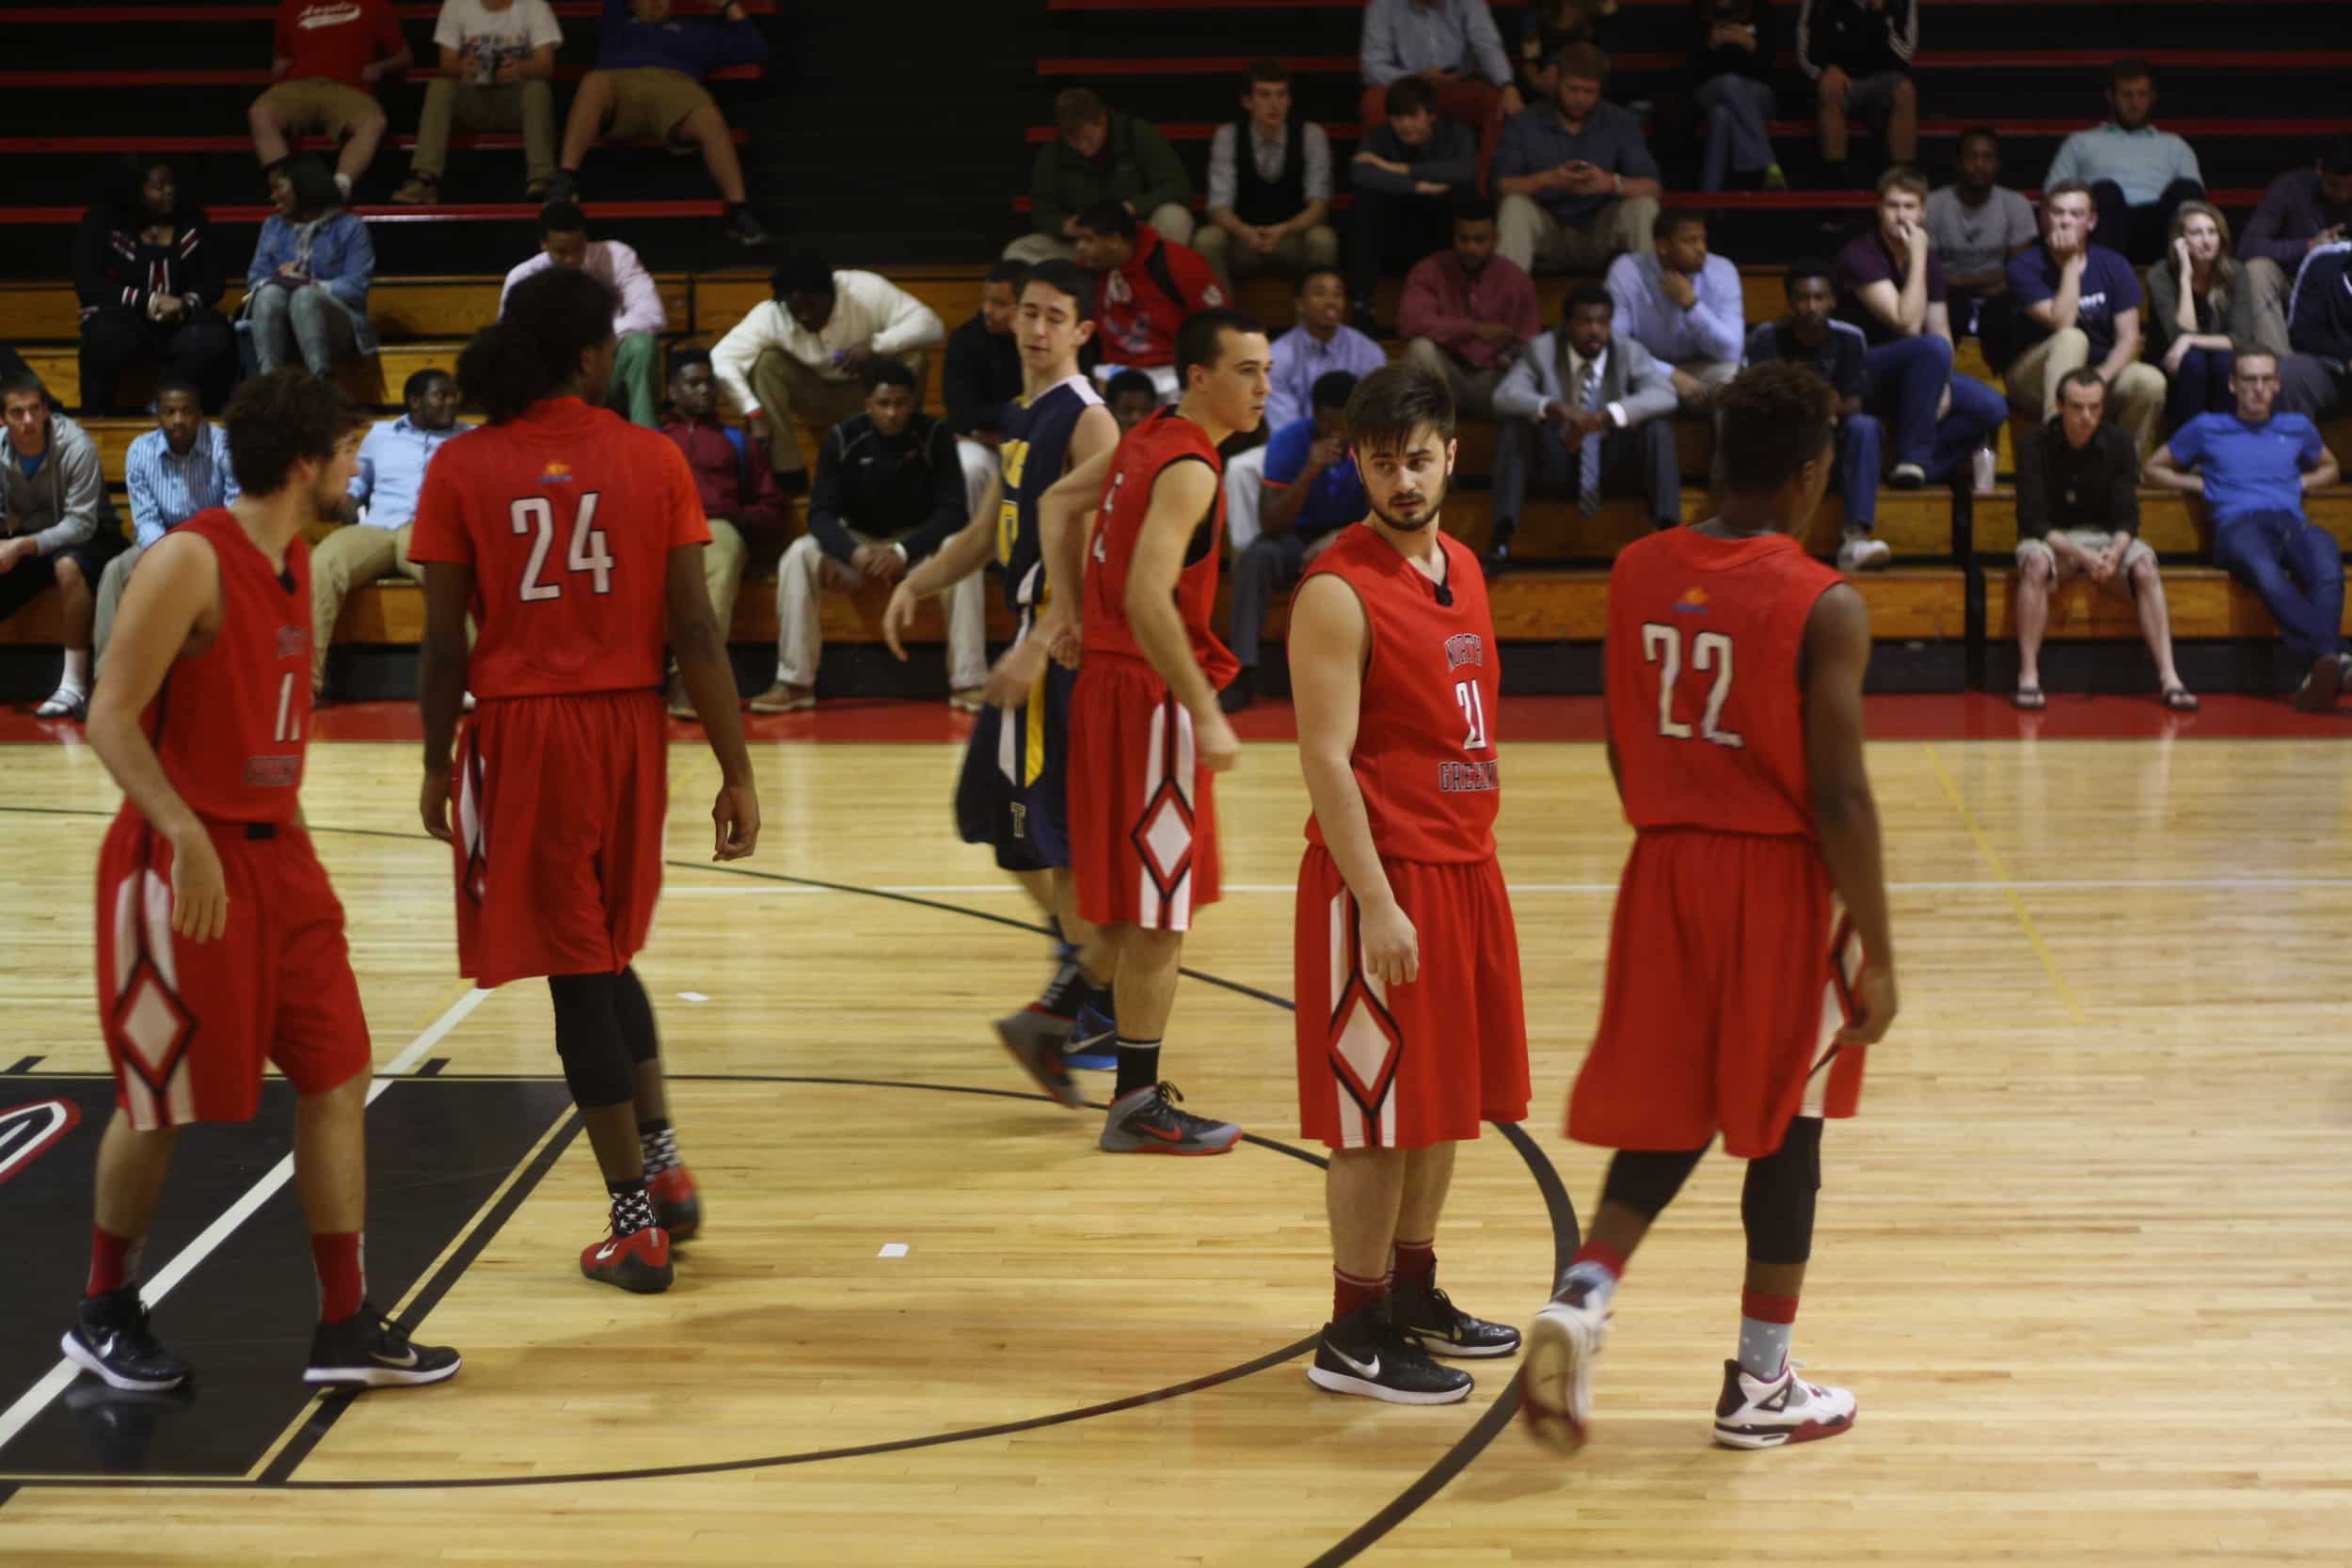  NGU players take their places on the court. 